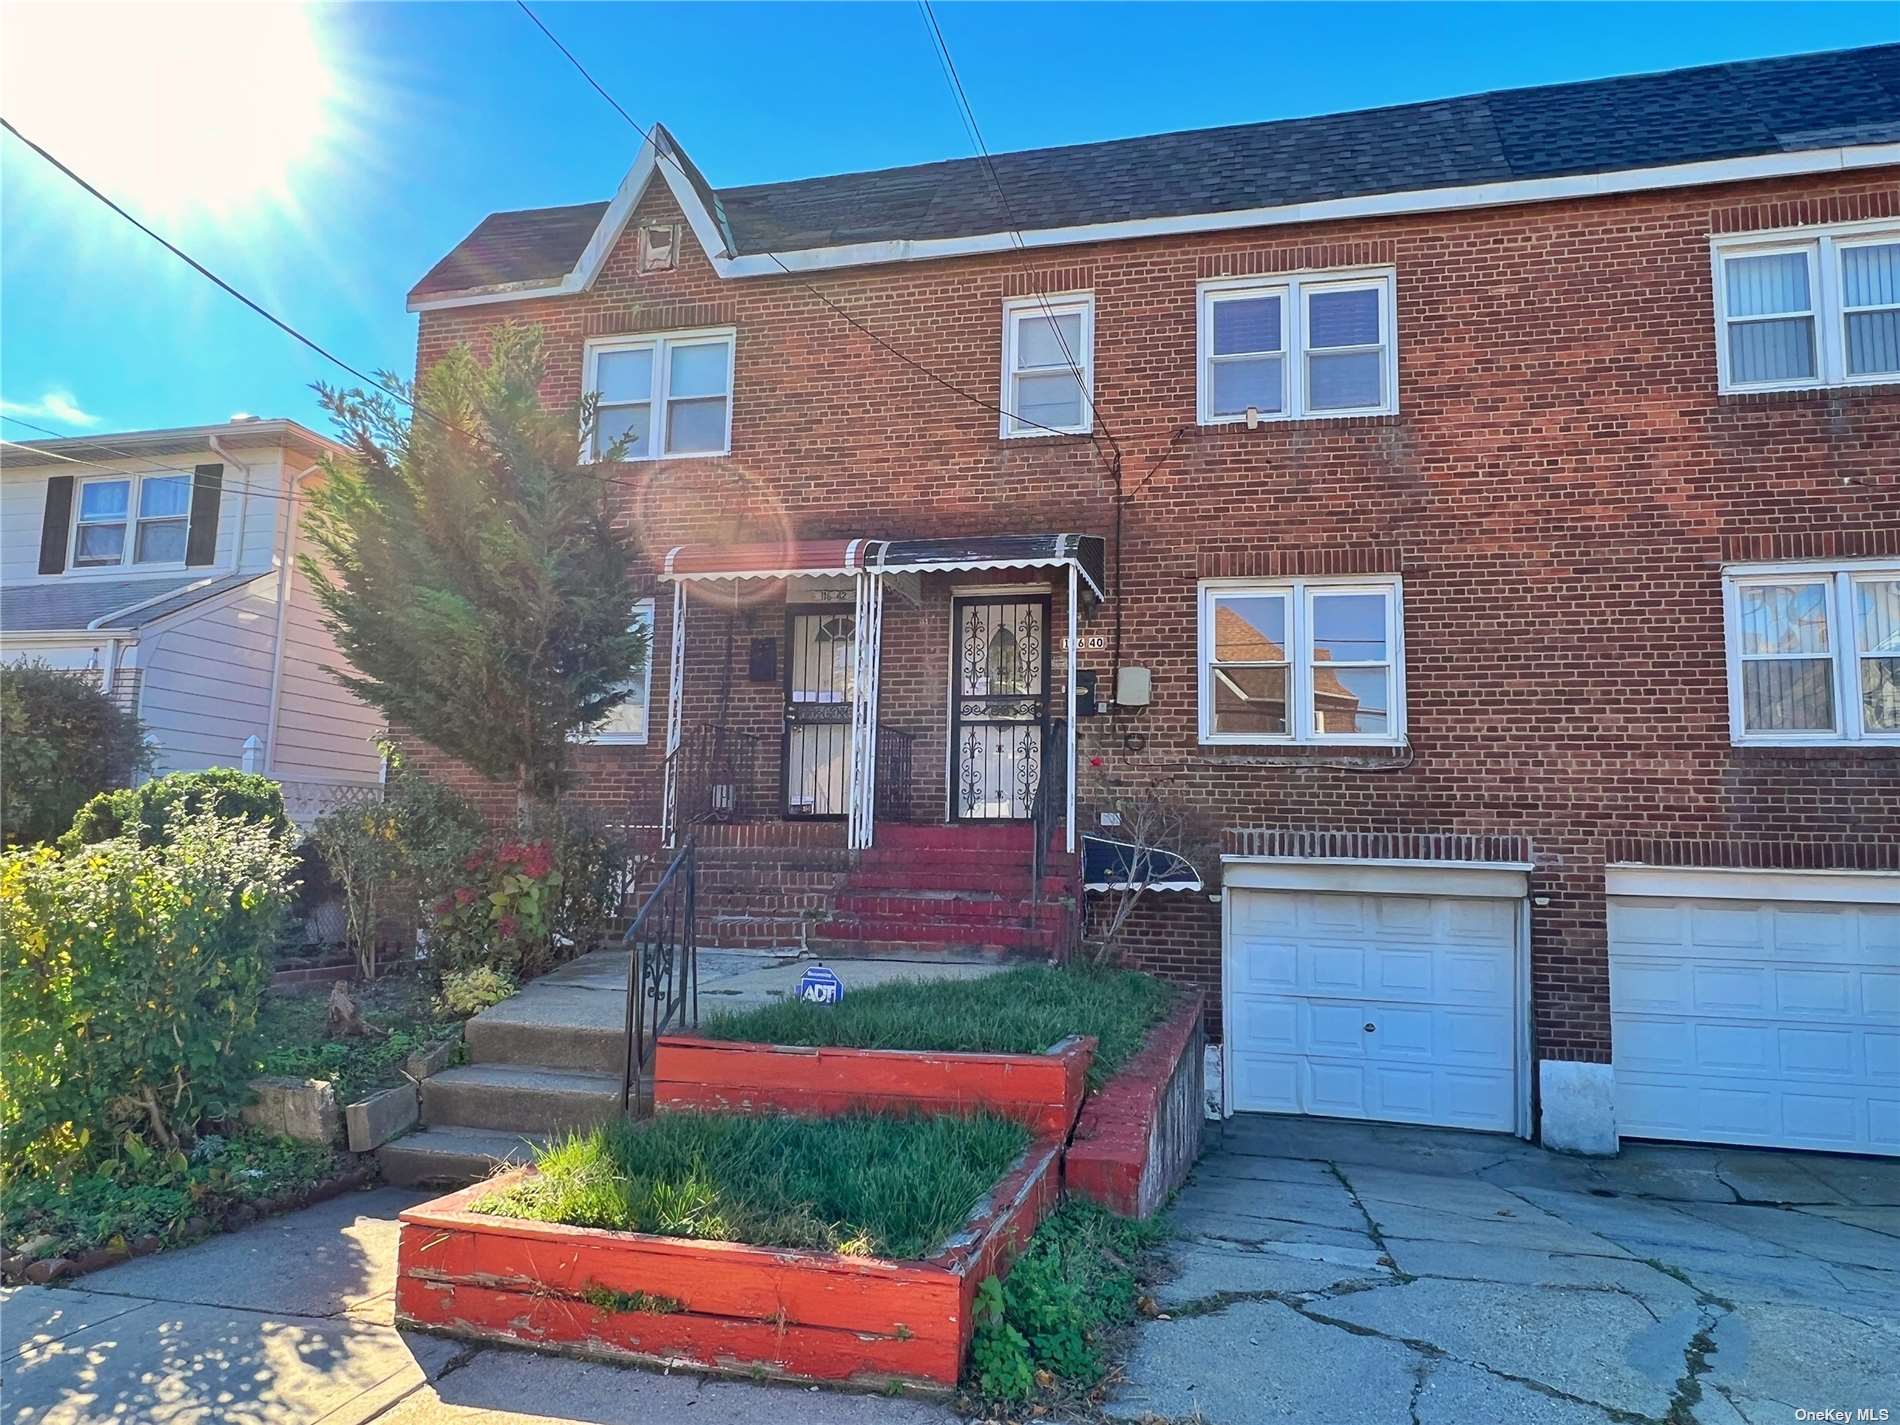 Single Family in Saint Albans - 204th  Queens, NY 11412